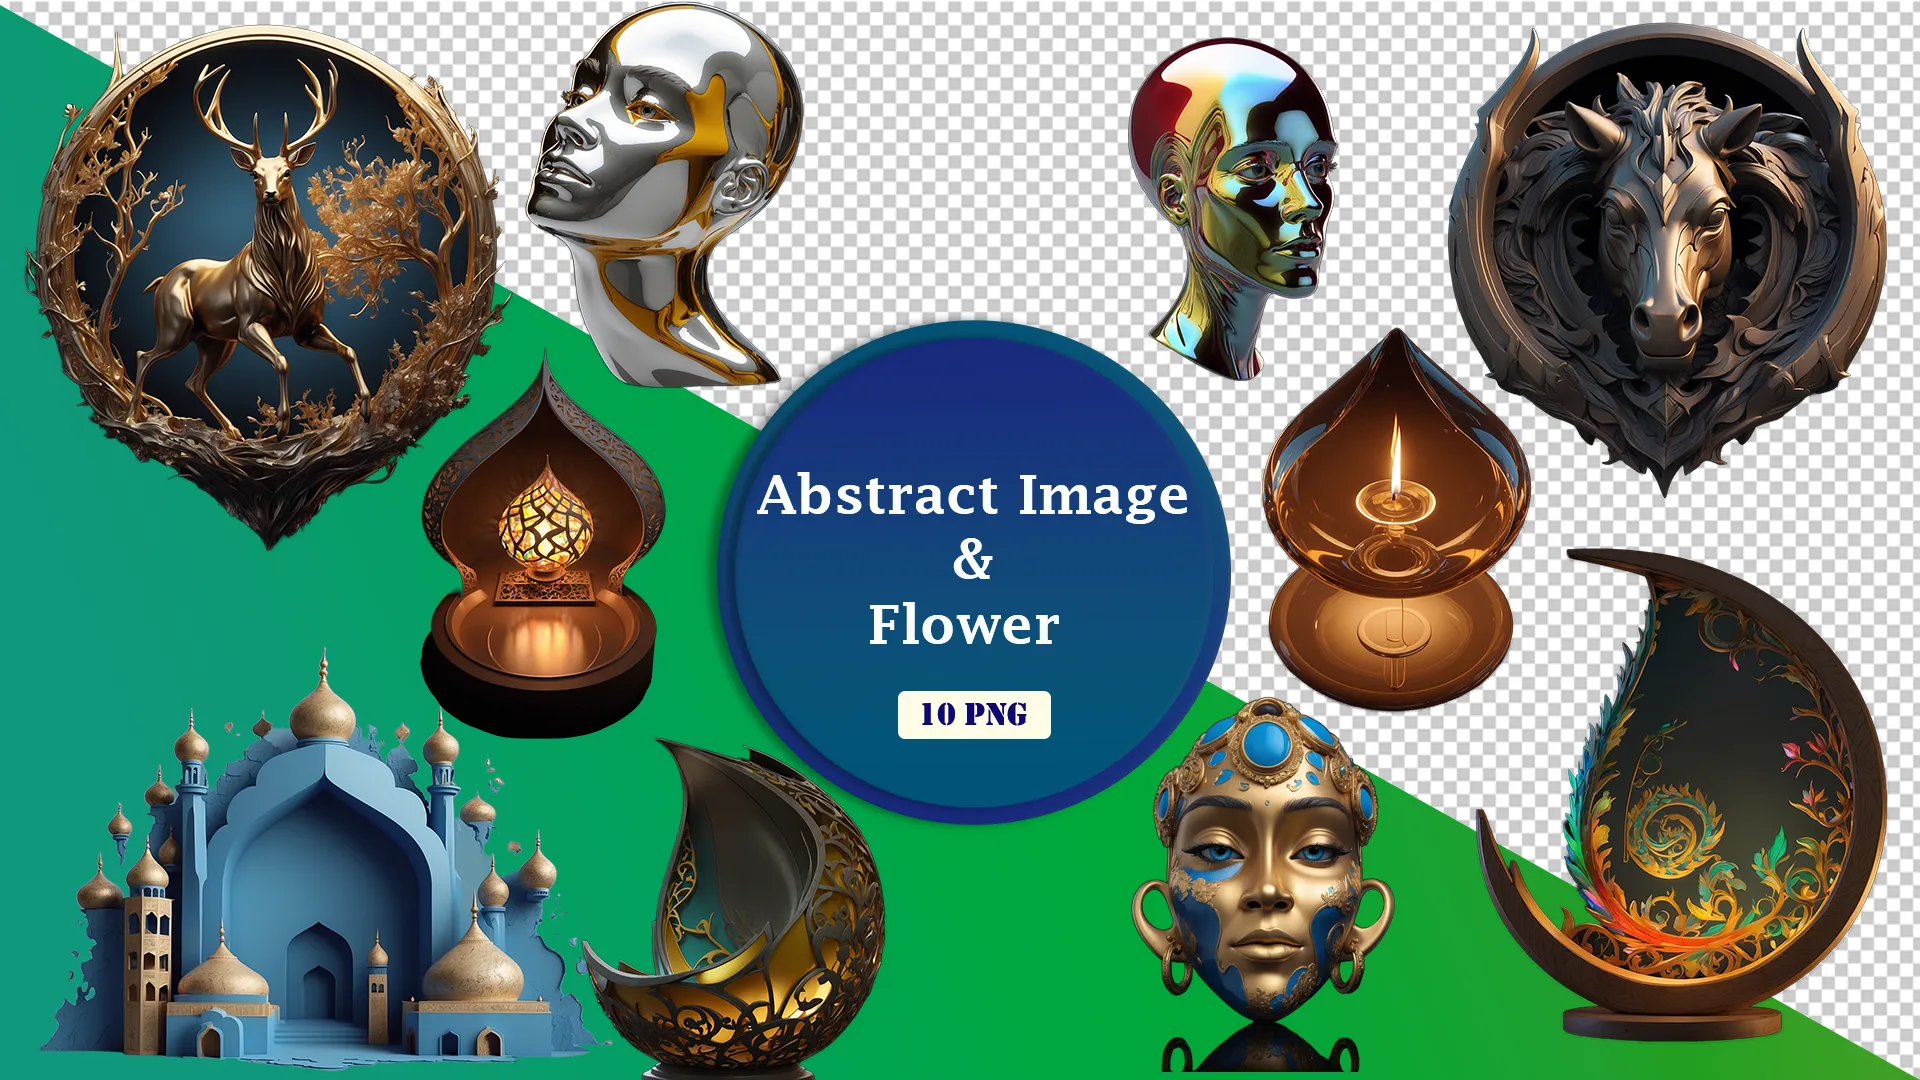 Animal Icons and Surreal Faces High-Quality 3D Assets image